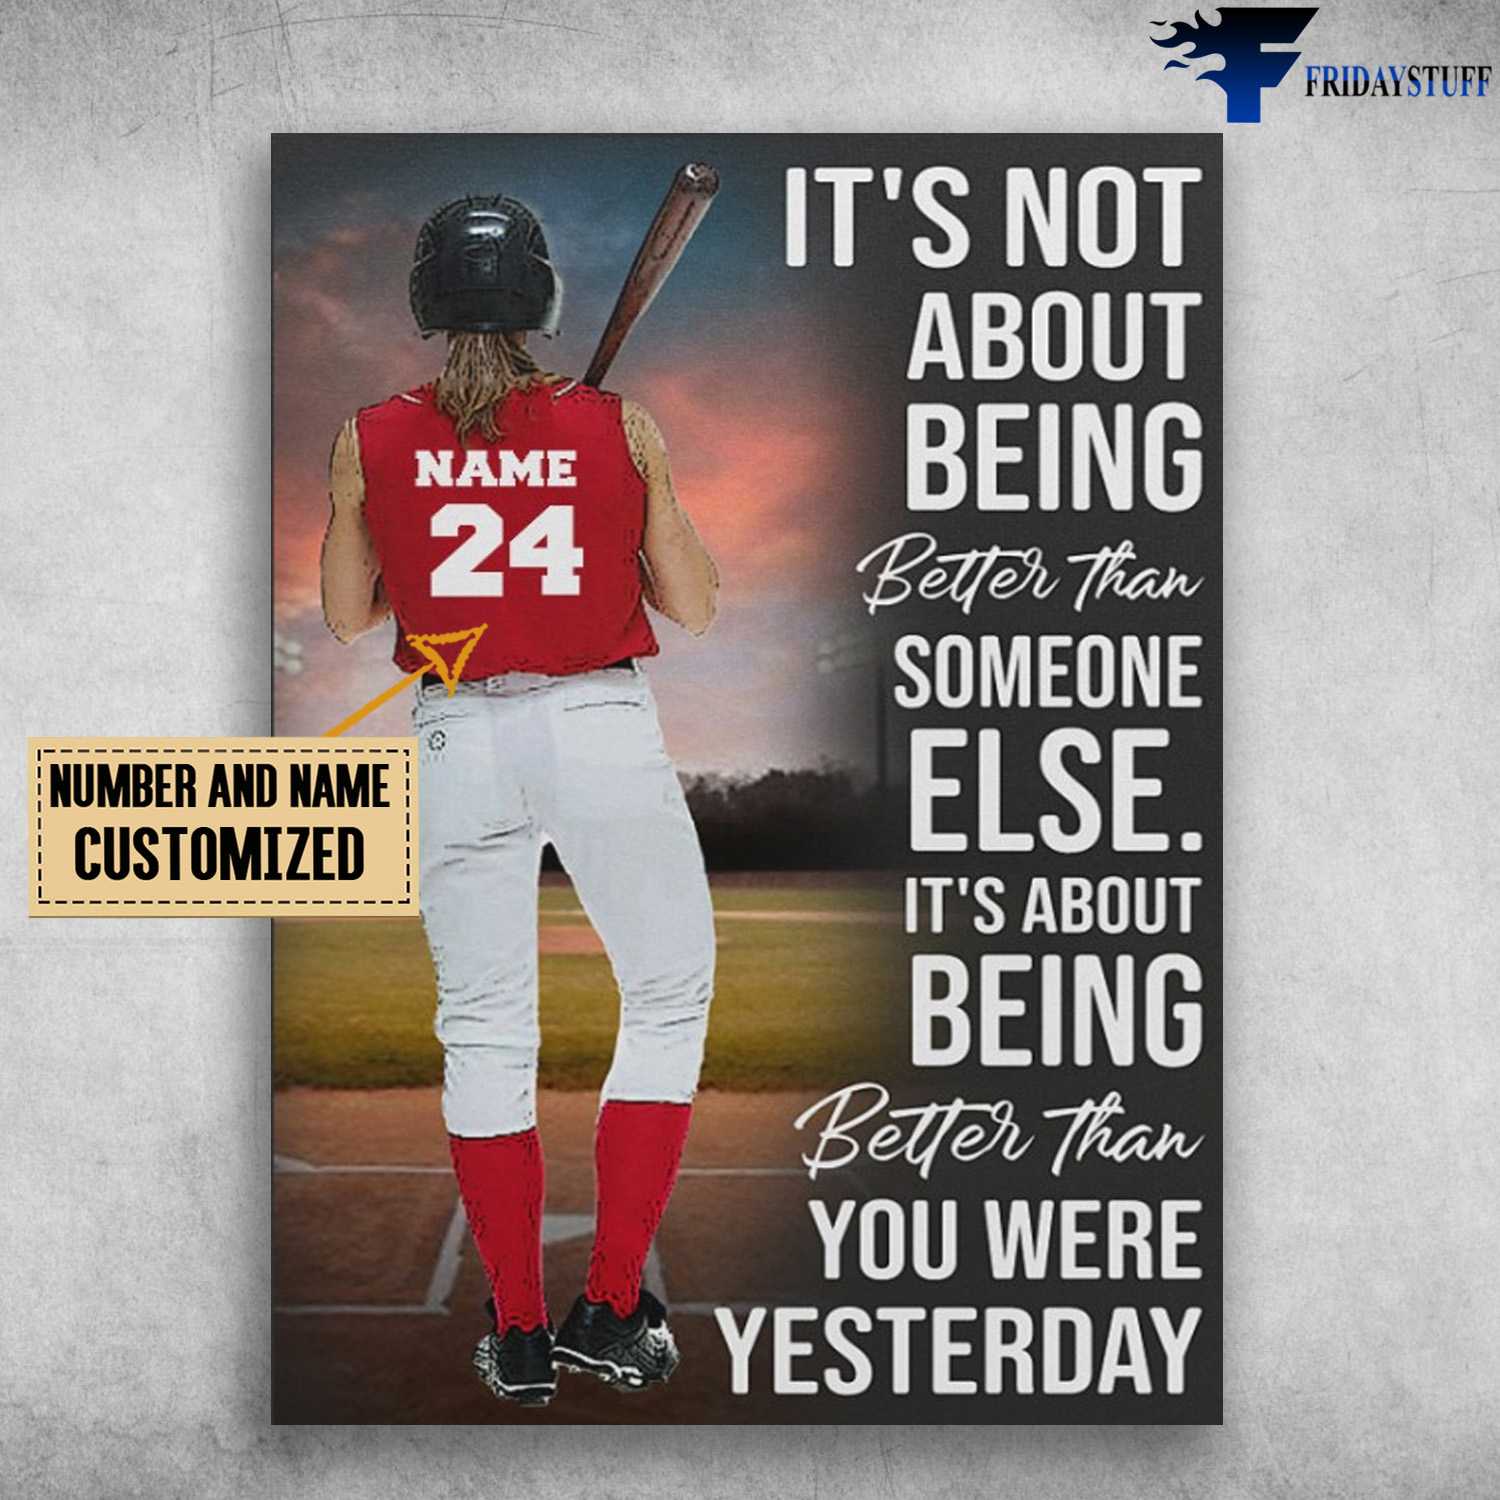 Baseball Player, Girl Loves Baseball, It's Not About How Bad You Want It, It's About How You're Willing To Hard Rork For It